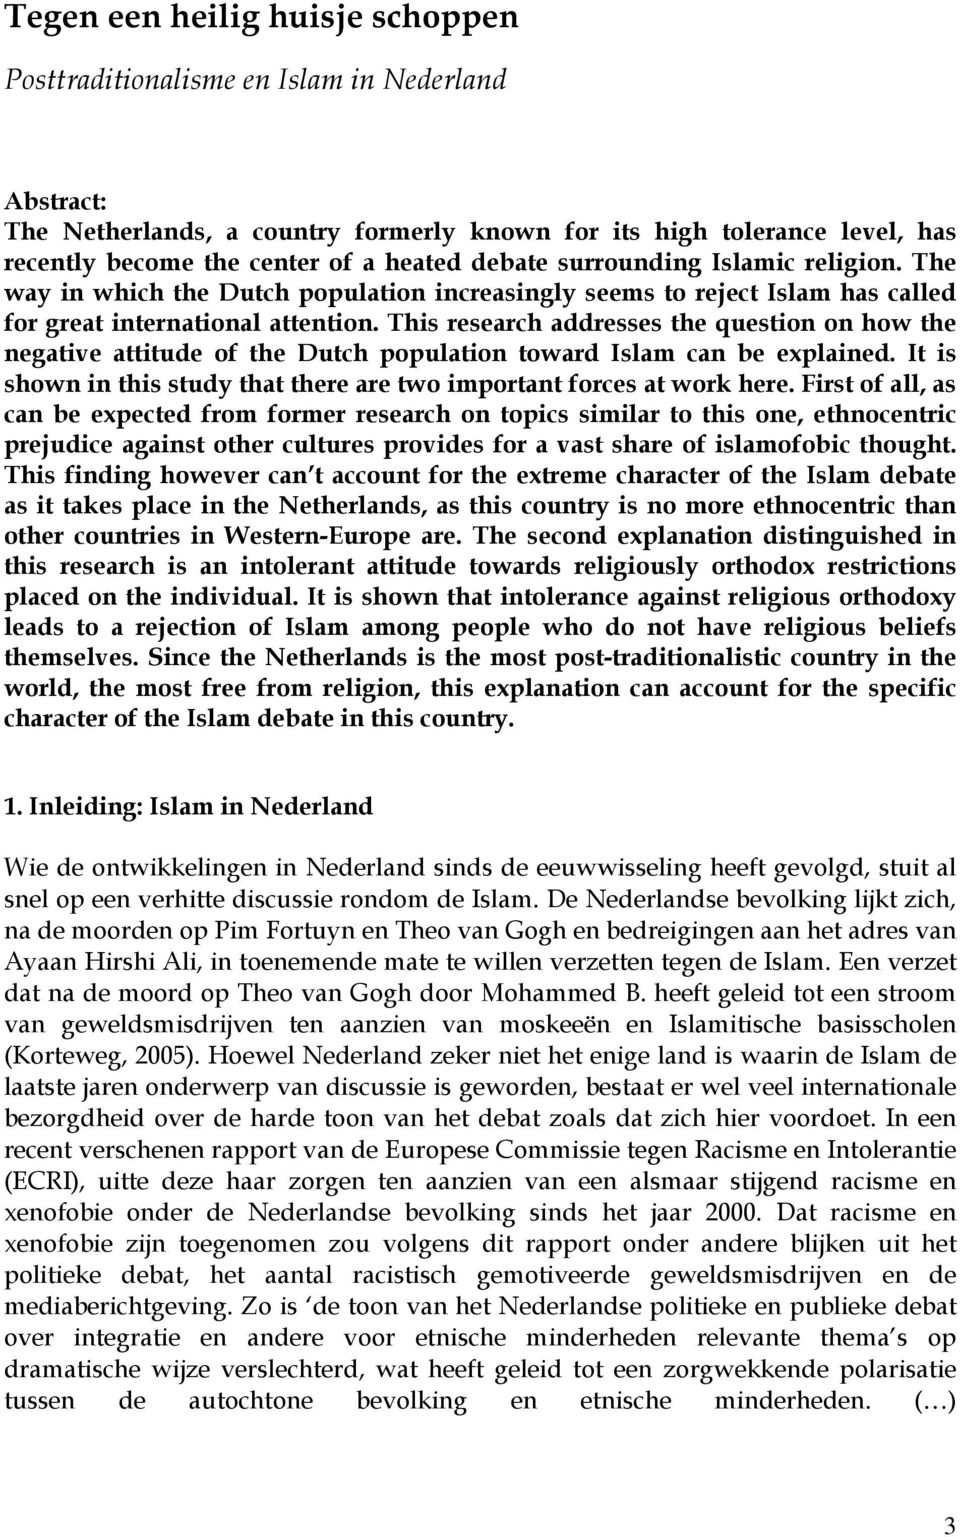 This research addresses the question on how the negative attitude of the Dutch population toward Islam can be explained. It is shown in this study that there are two important forces at work here.